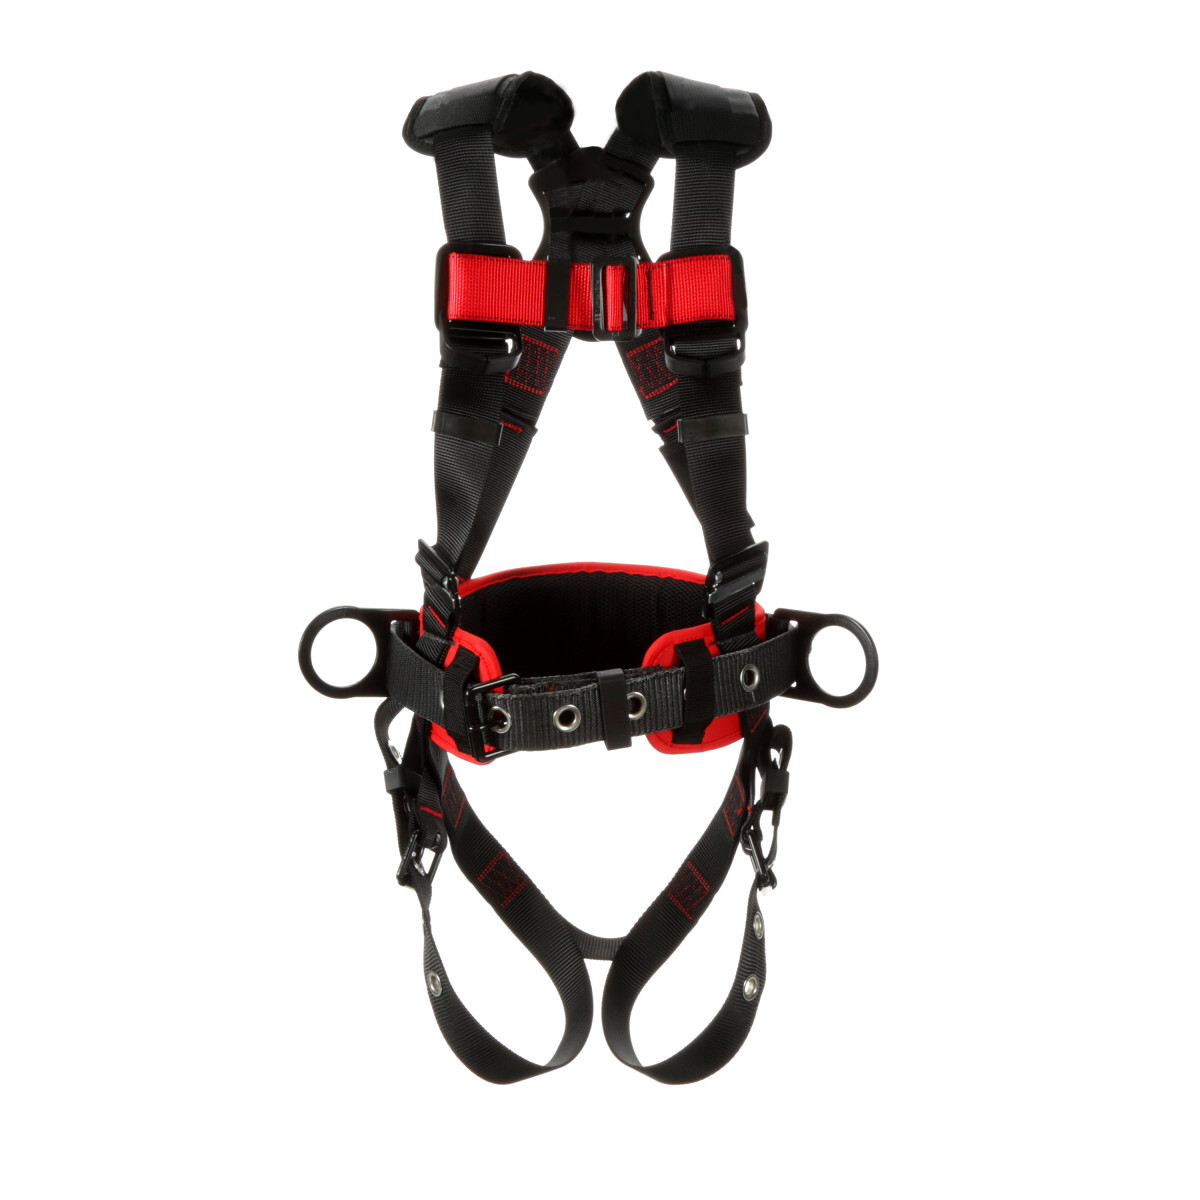 3M™ PROTECTA® Medium - Large Construction Style Positioning Harness (Replaces 1191209)